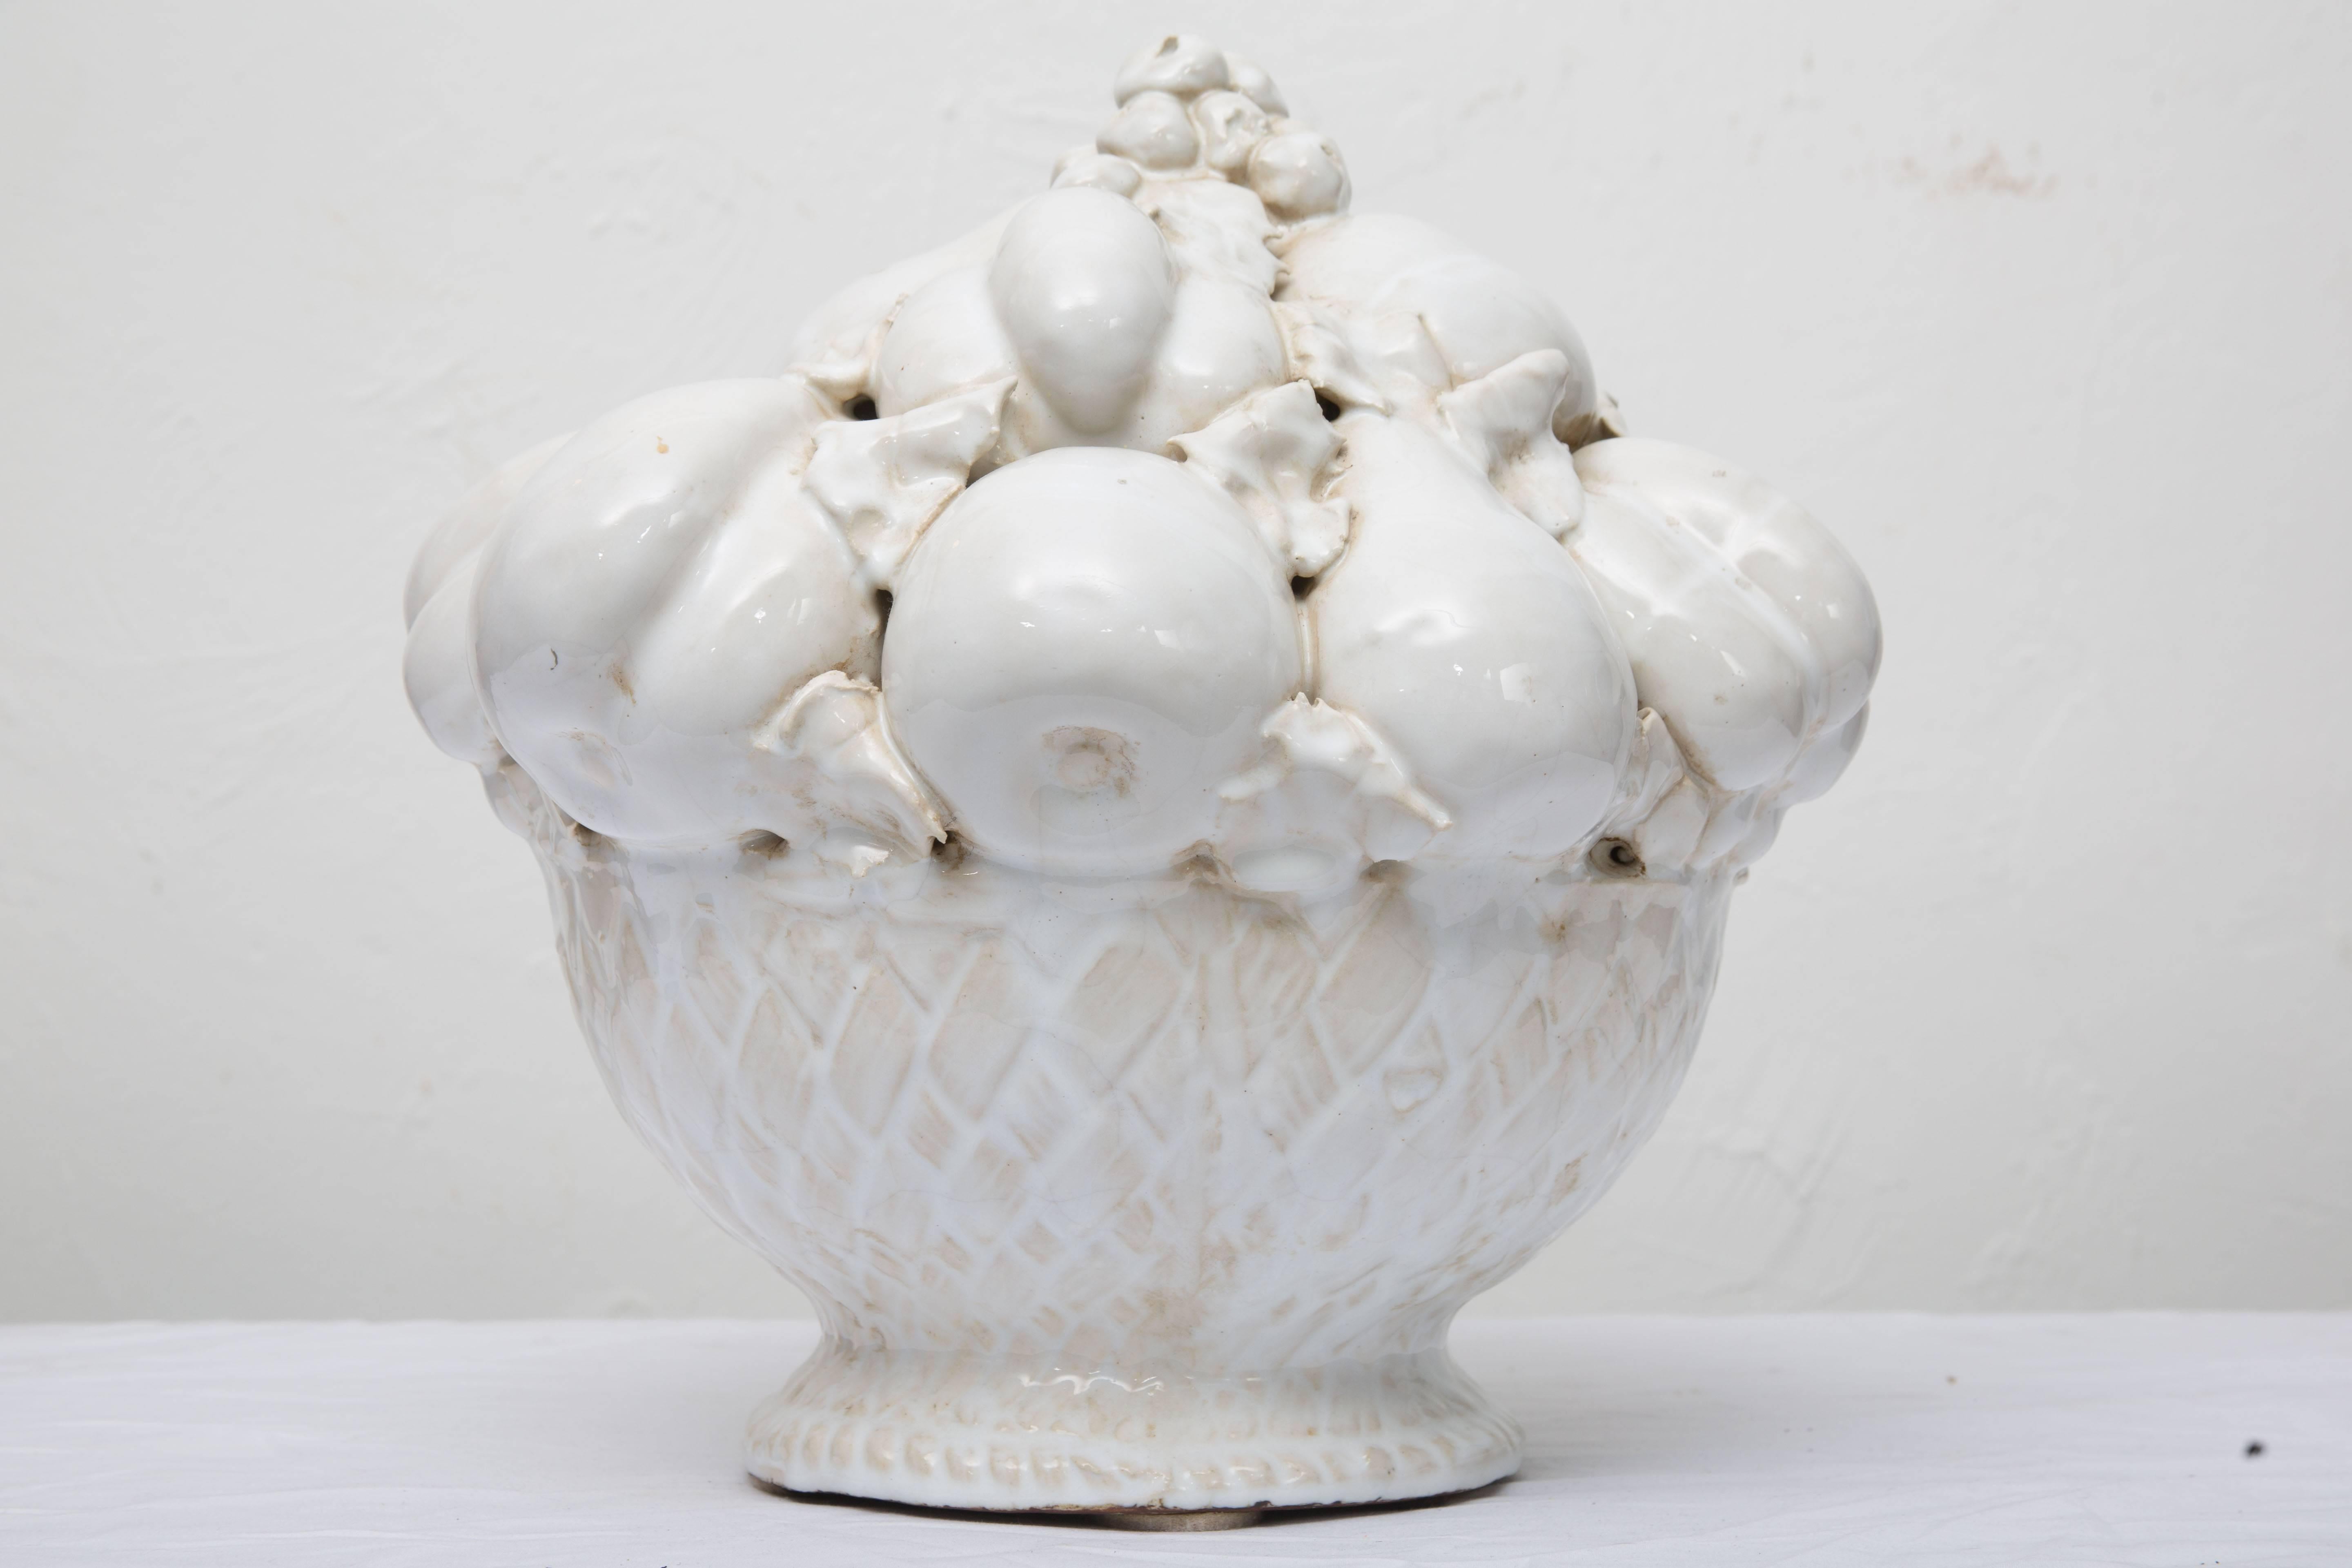 This Italian large-scale white glazed fruit basket offers a decorative yet subtle and striking accent, circa early 20th century.